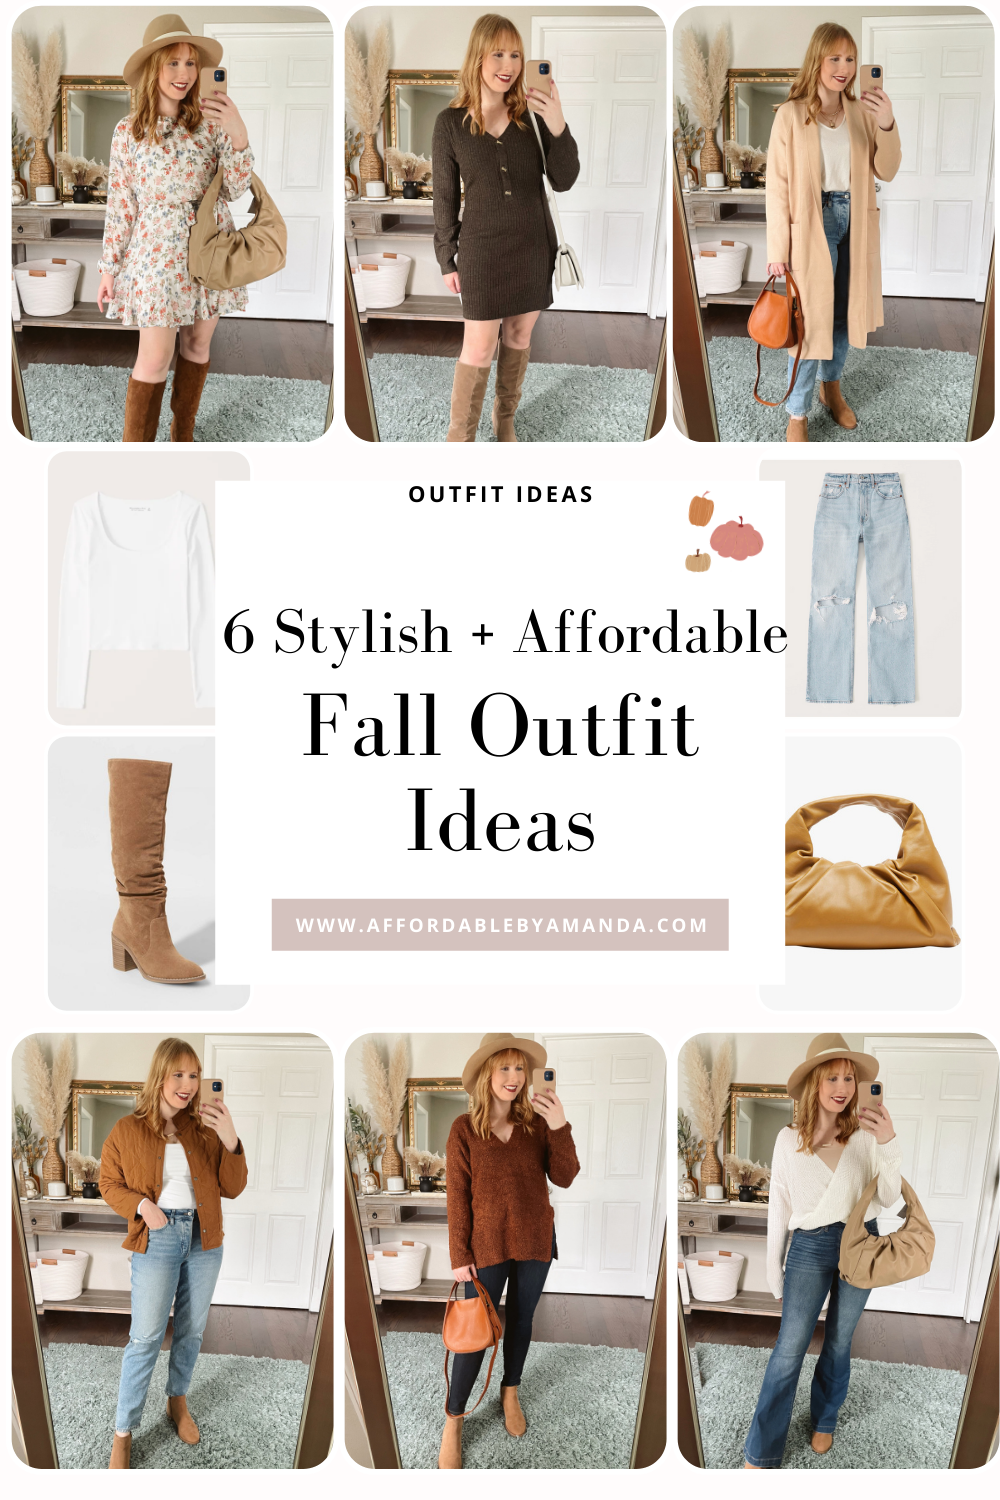 15+ FALL OUTFIT IDEAS